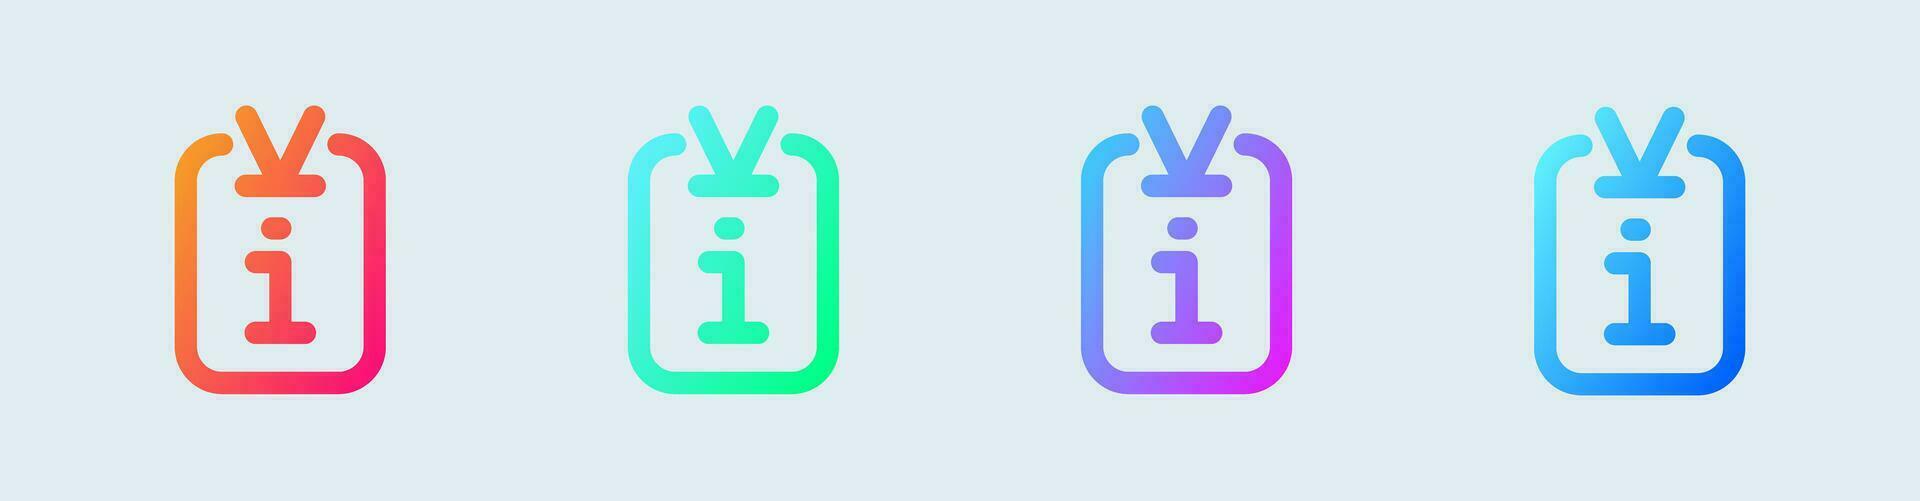 About line icon in gradient colors. Info signs vector illustration.